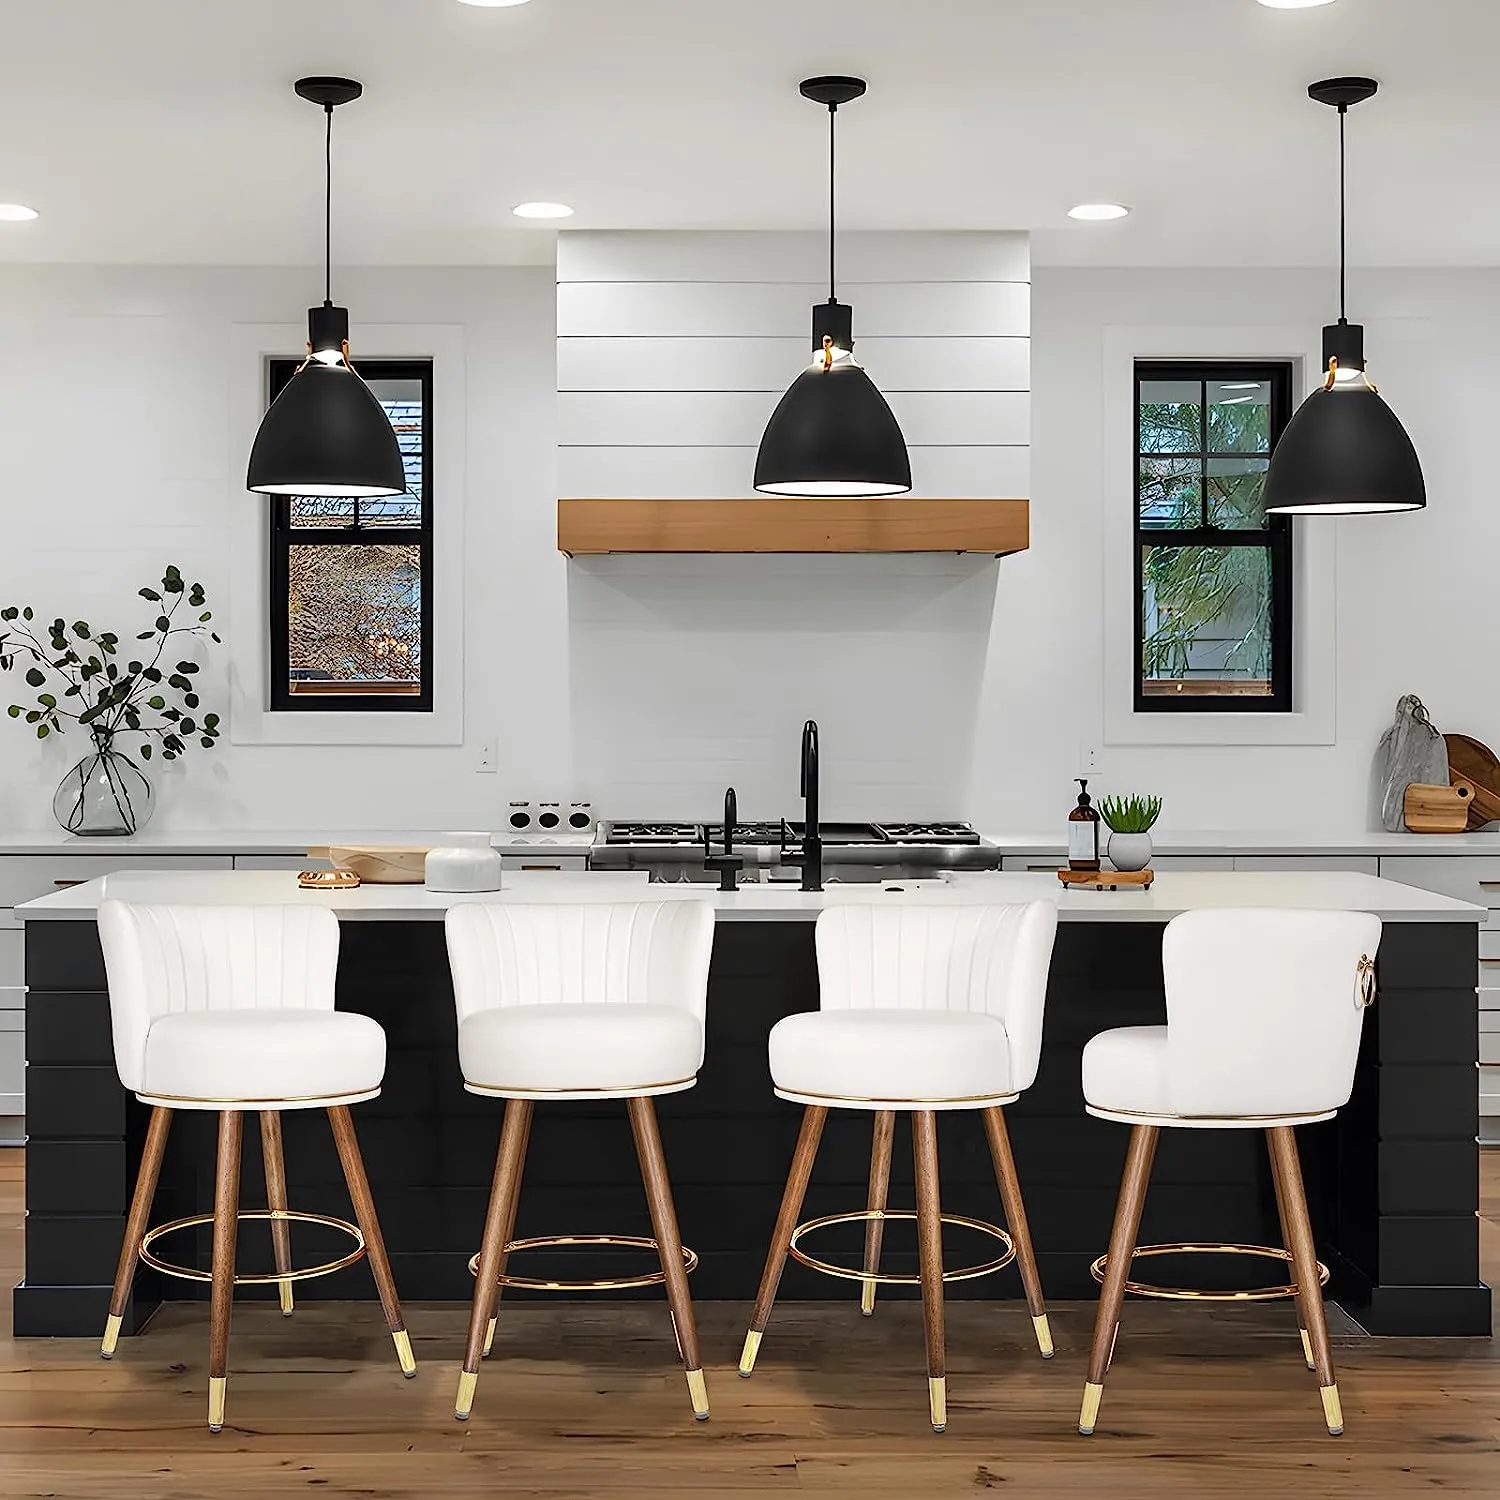 “A modern kitchen interior featuring a set of four SeekFancy 27” Swivel Bar Stools with white seats and wooden legs, positioned at a black and white kitchen island. Above the island are three black pendant lights, illuminating the space."